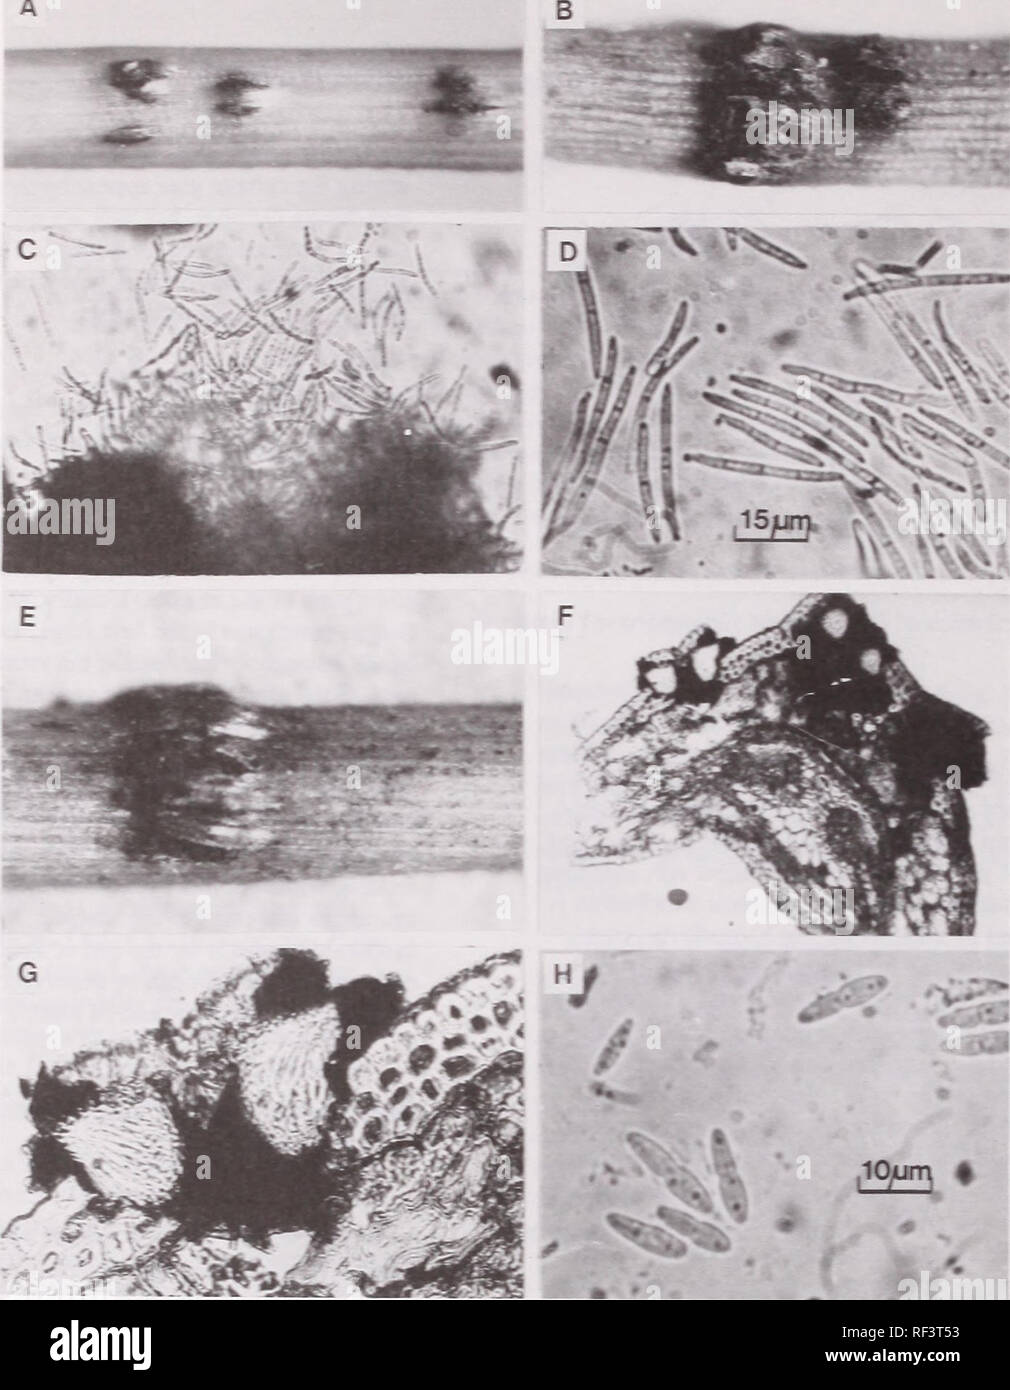 . Recent research on foliage diseases : conference proceedings : Carlisle, Pennsylvania, May 29-June 2, 1989. Leaves Diseases and pests United States Congresses. Figure 1.—Dse?:cs:rJ. A. Cordddorriua of die fungus or. an Ausrim pine needle. B. Coniddorraia or. a Jeffrey pine needle. C. Aeervulus with conidia. D. Conidia. E. Ascostromata of fungus on an Austrian pine needle. F. Verrleil section of ascostromata. G. An ascostroma with wo locules rapturing the host epidermis. FL Ascospor^s. Thyr and Shaw (17), on the basis of conidial length, described rwo variedes c: die fences. D. r:v.: var. . Stock Photo